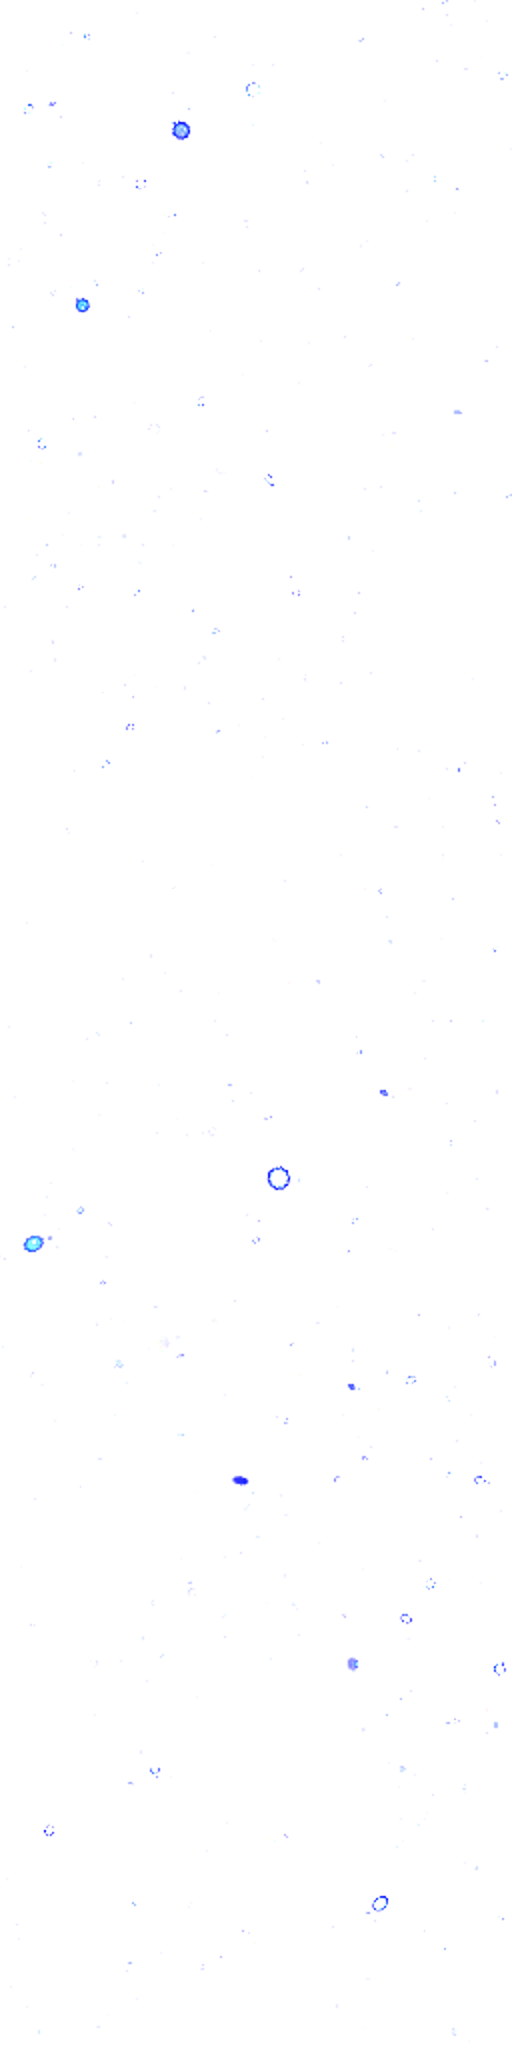 2D Spaceshooter Star near.png